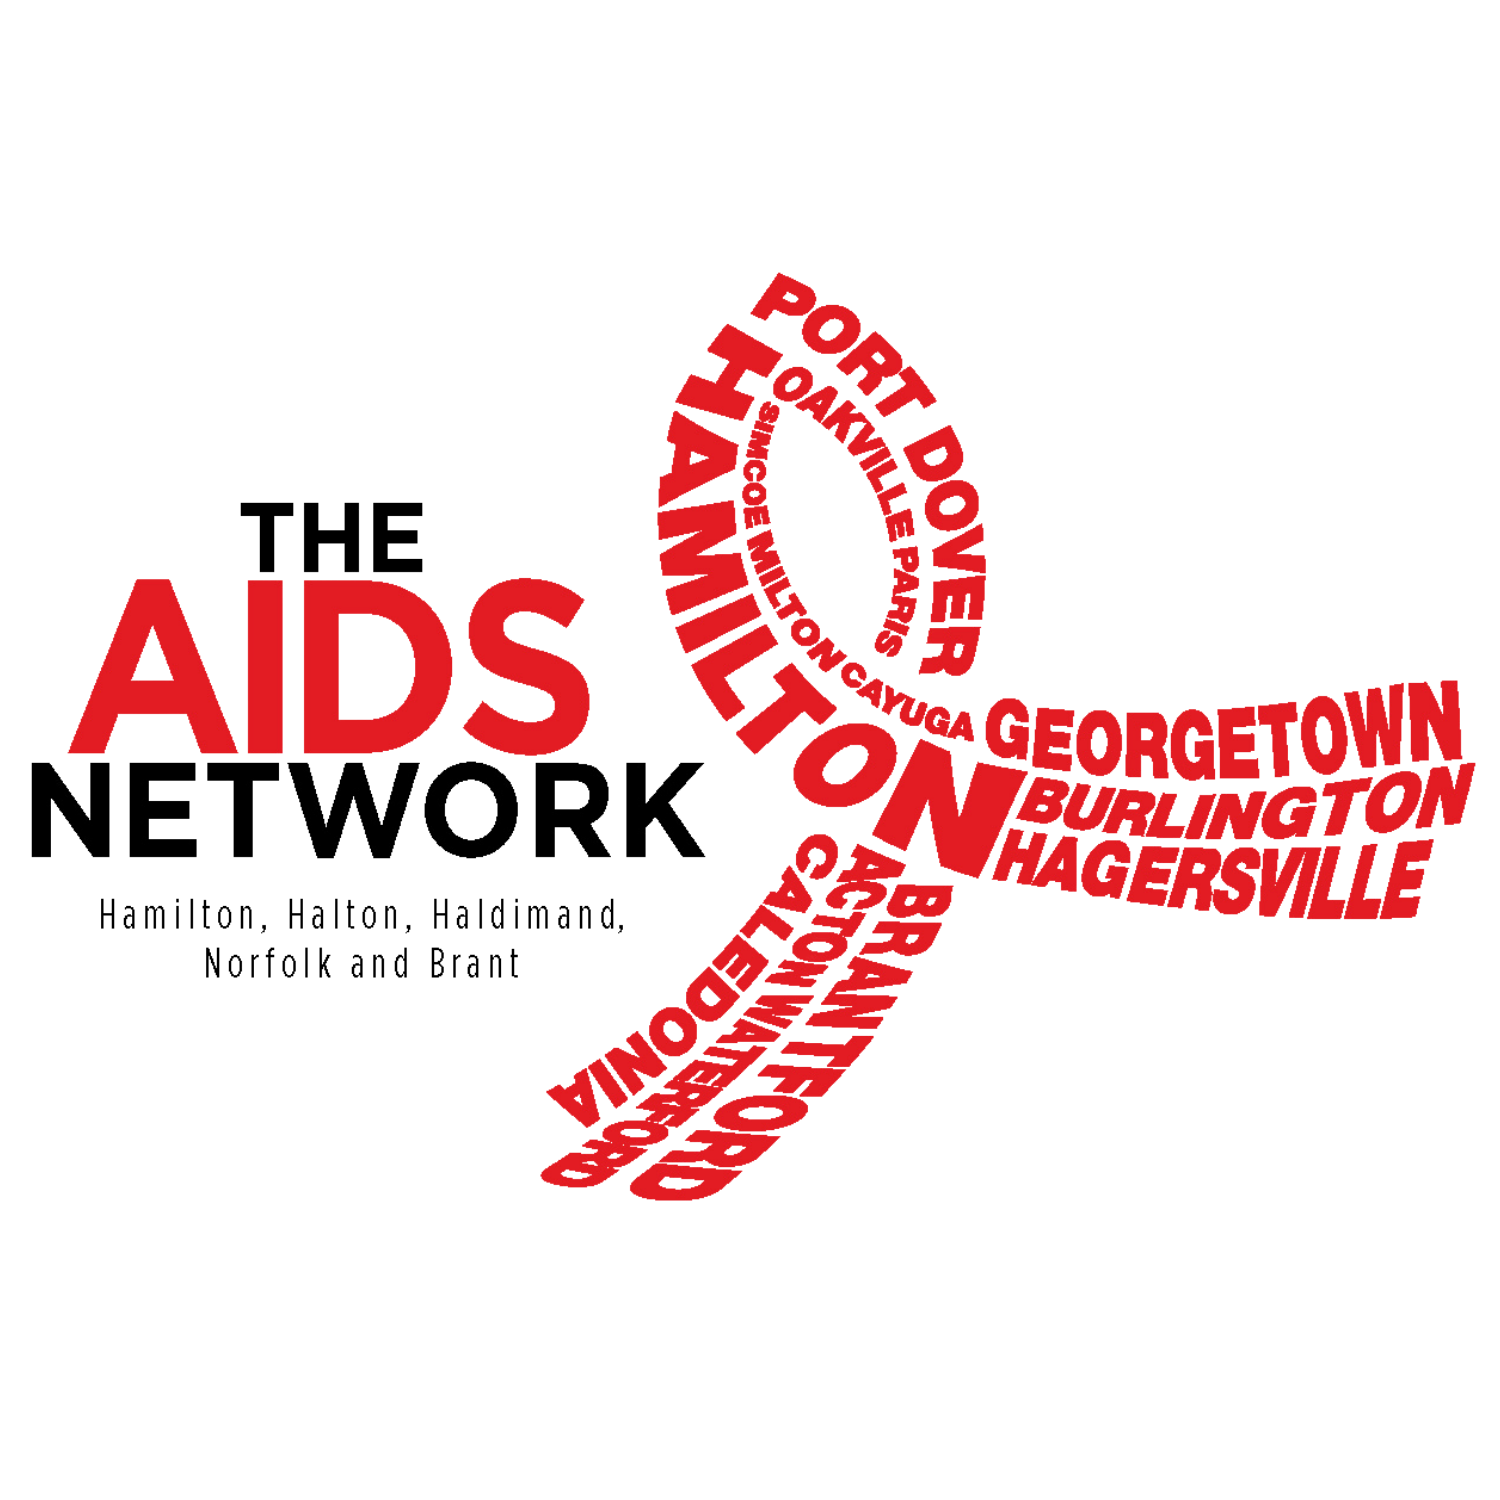 The AIDS Network logo.